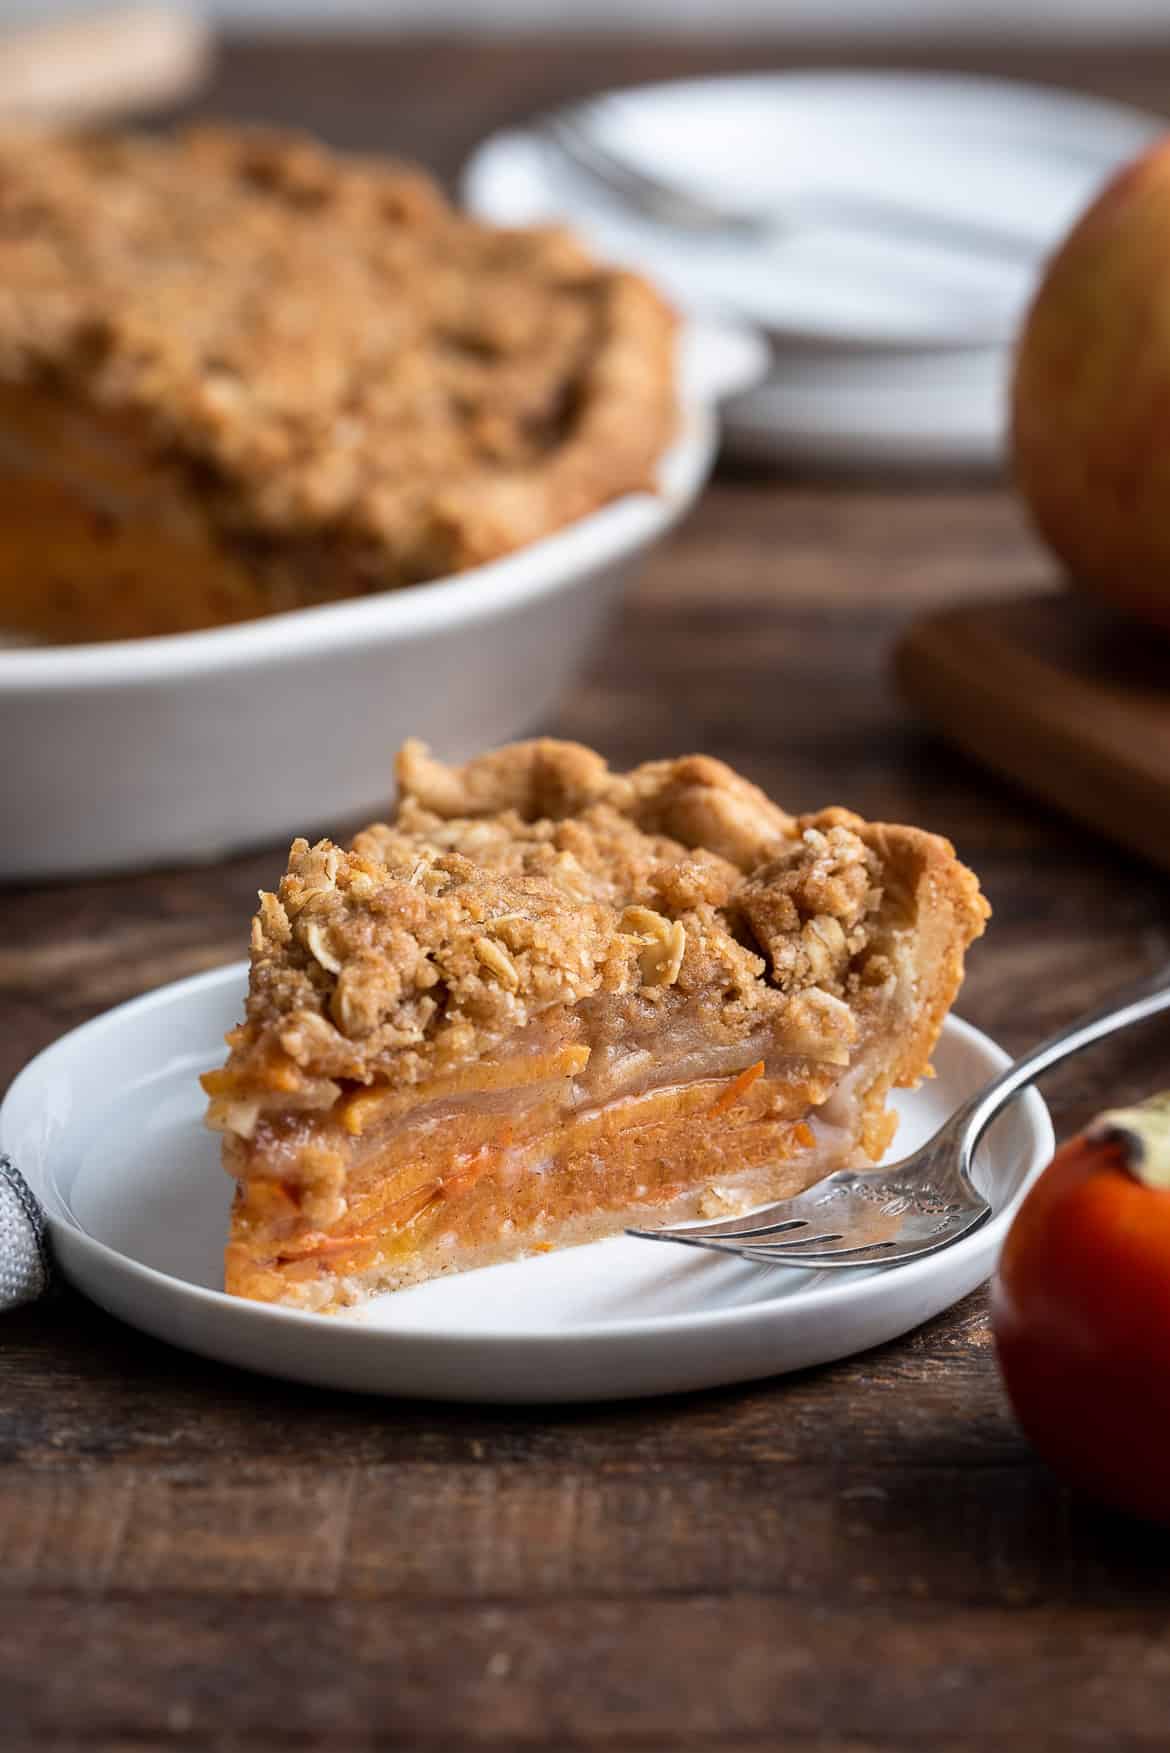 Streusel topped Persimmon Apple Crumb Pie baked in a white pie plate.